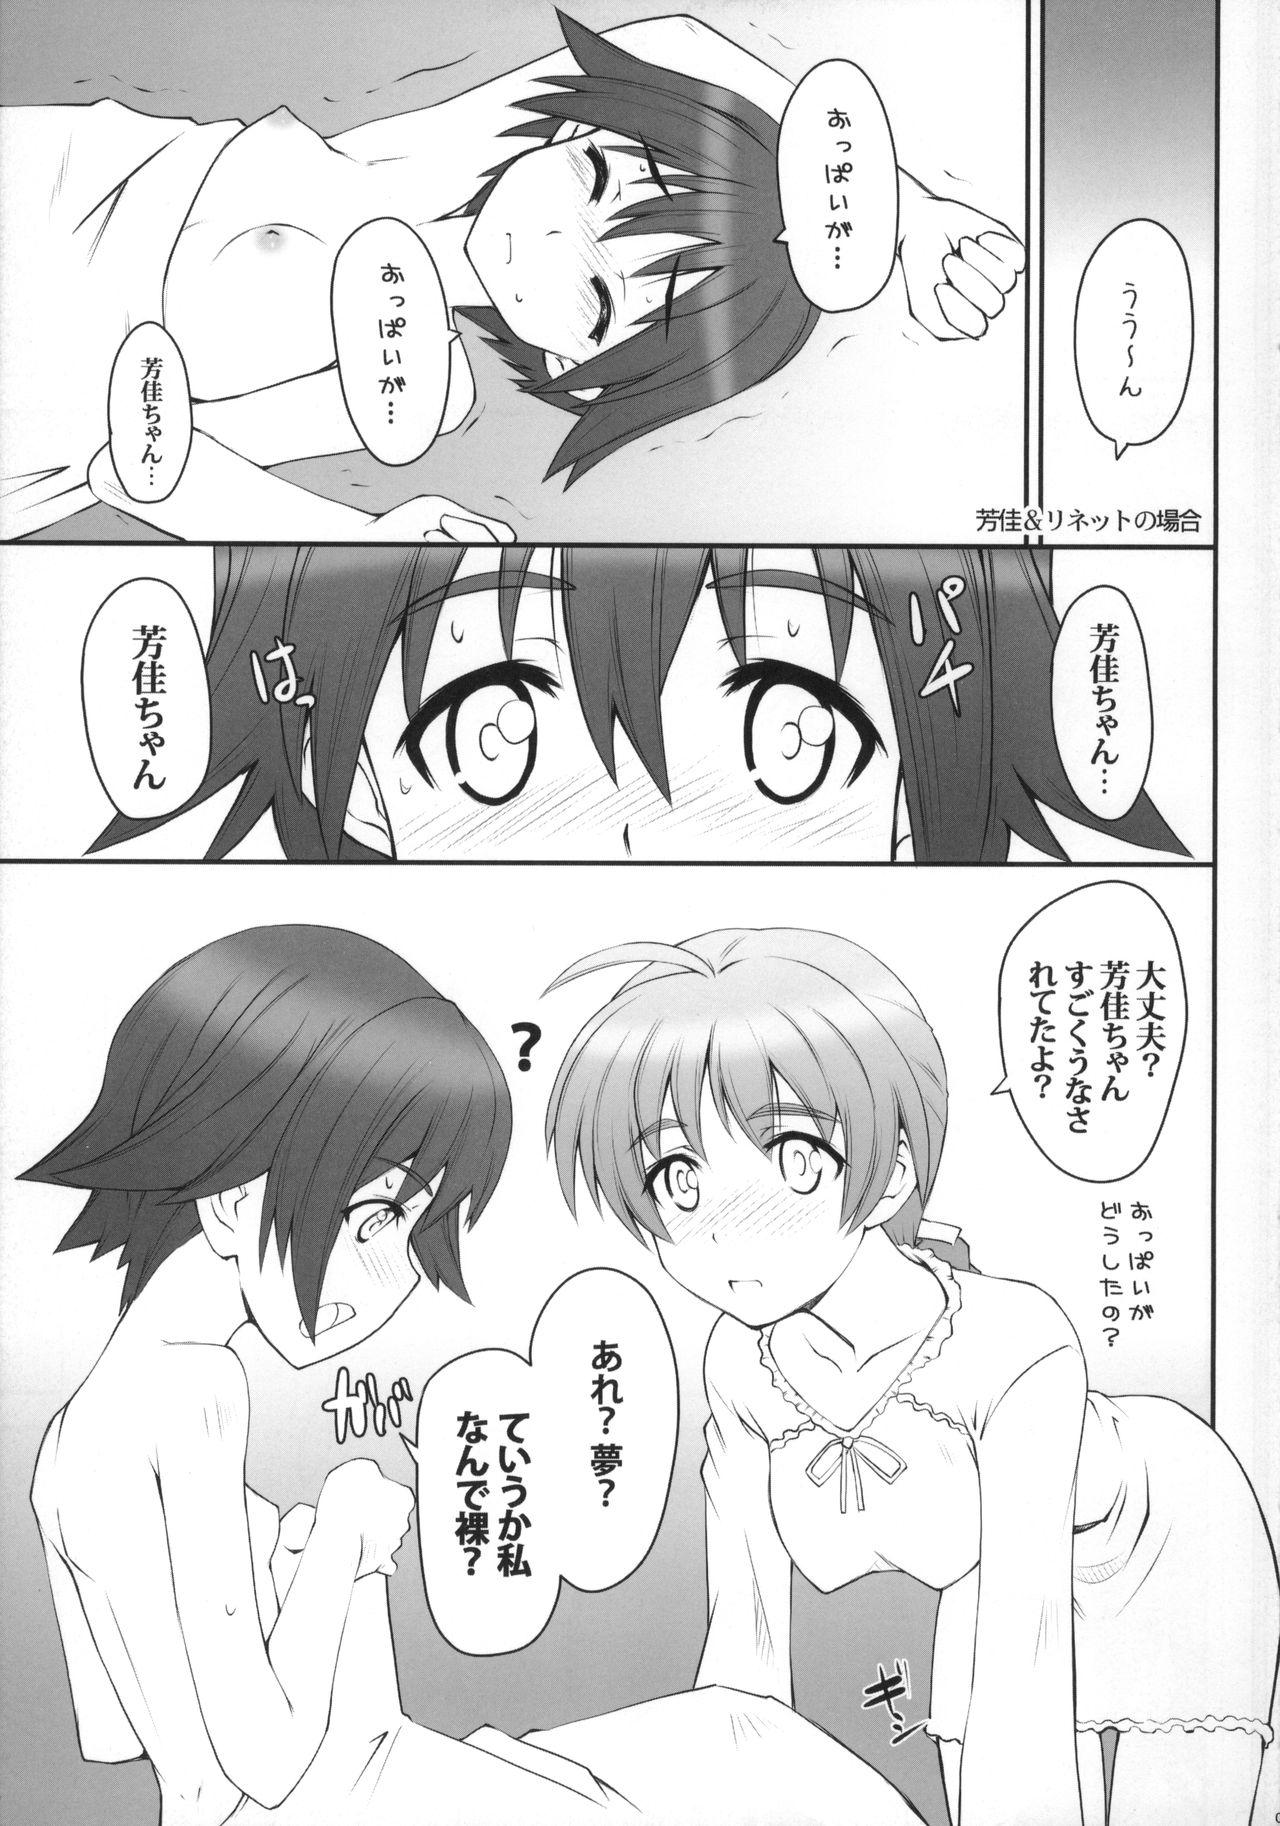 Worship FORMATION! BRAVO+1 - Strike witches Clothed - Page 4